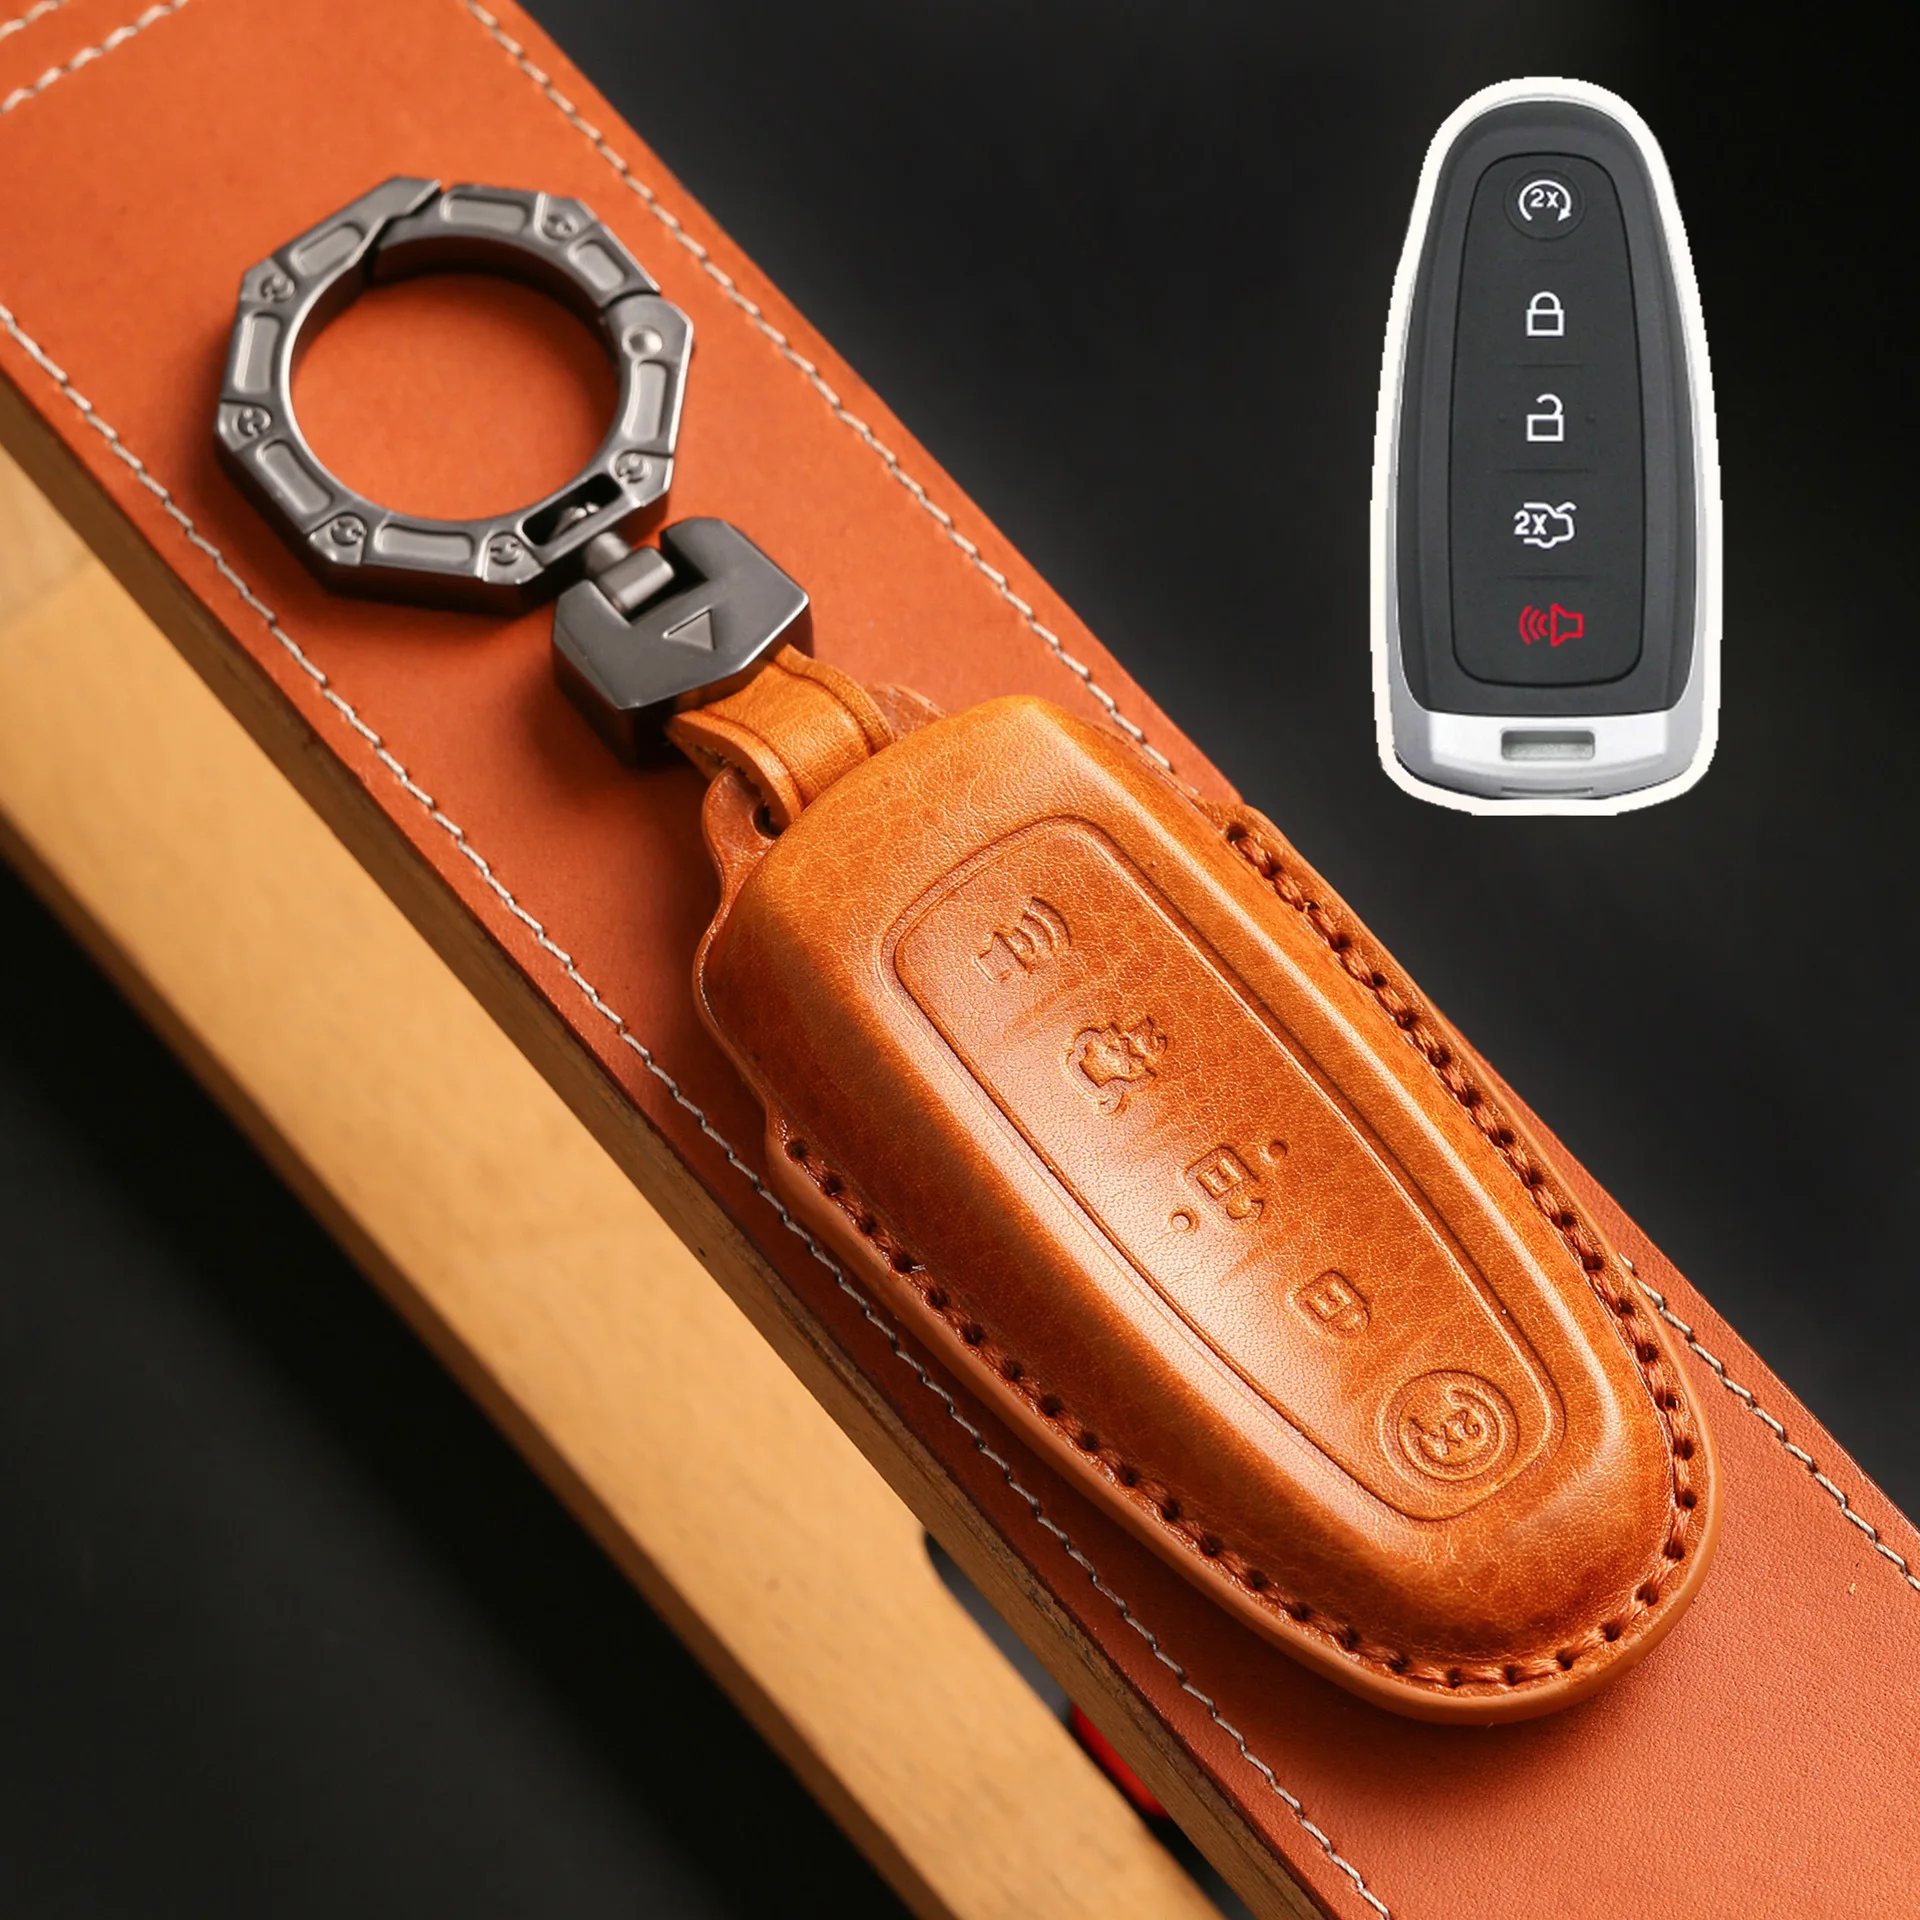 

Luxury Leather Car Key Case Cover for Ford Escape Edge Explorer Focus Flex Taurus Fusion Lincoln MKS MKT MKX CMX